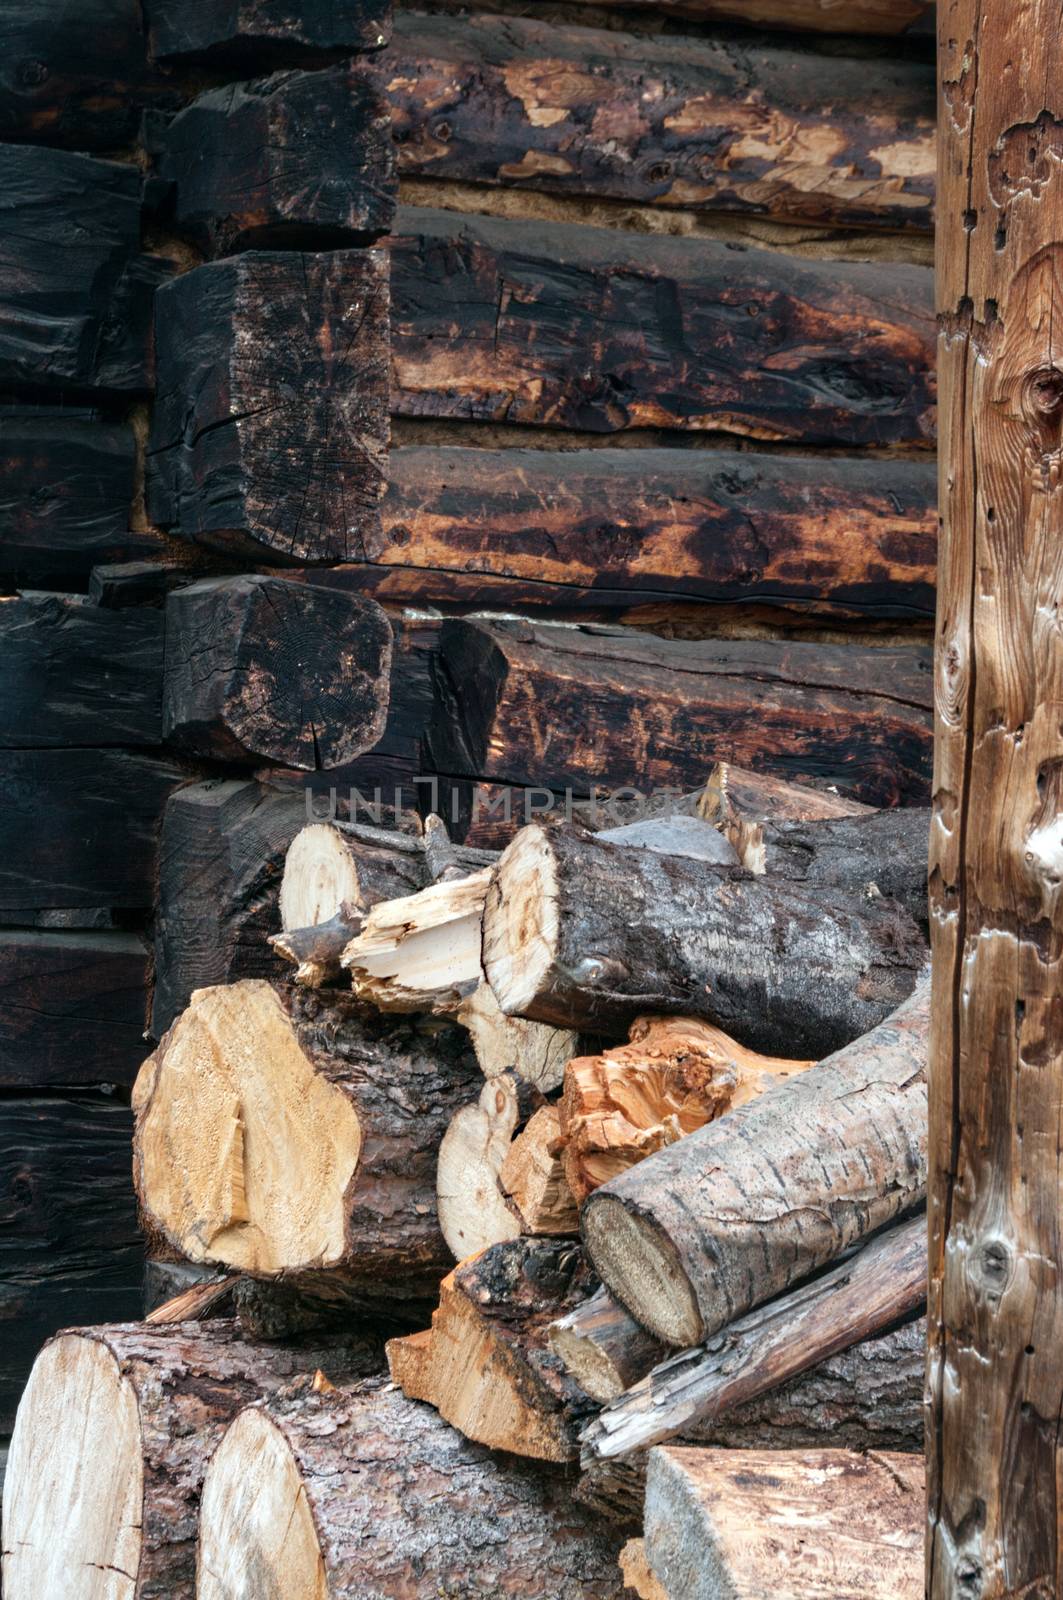 Firewood stacked at a Loghome by edcorey